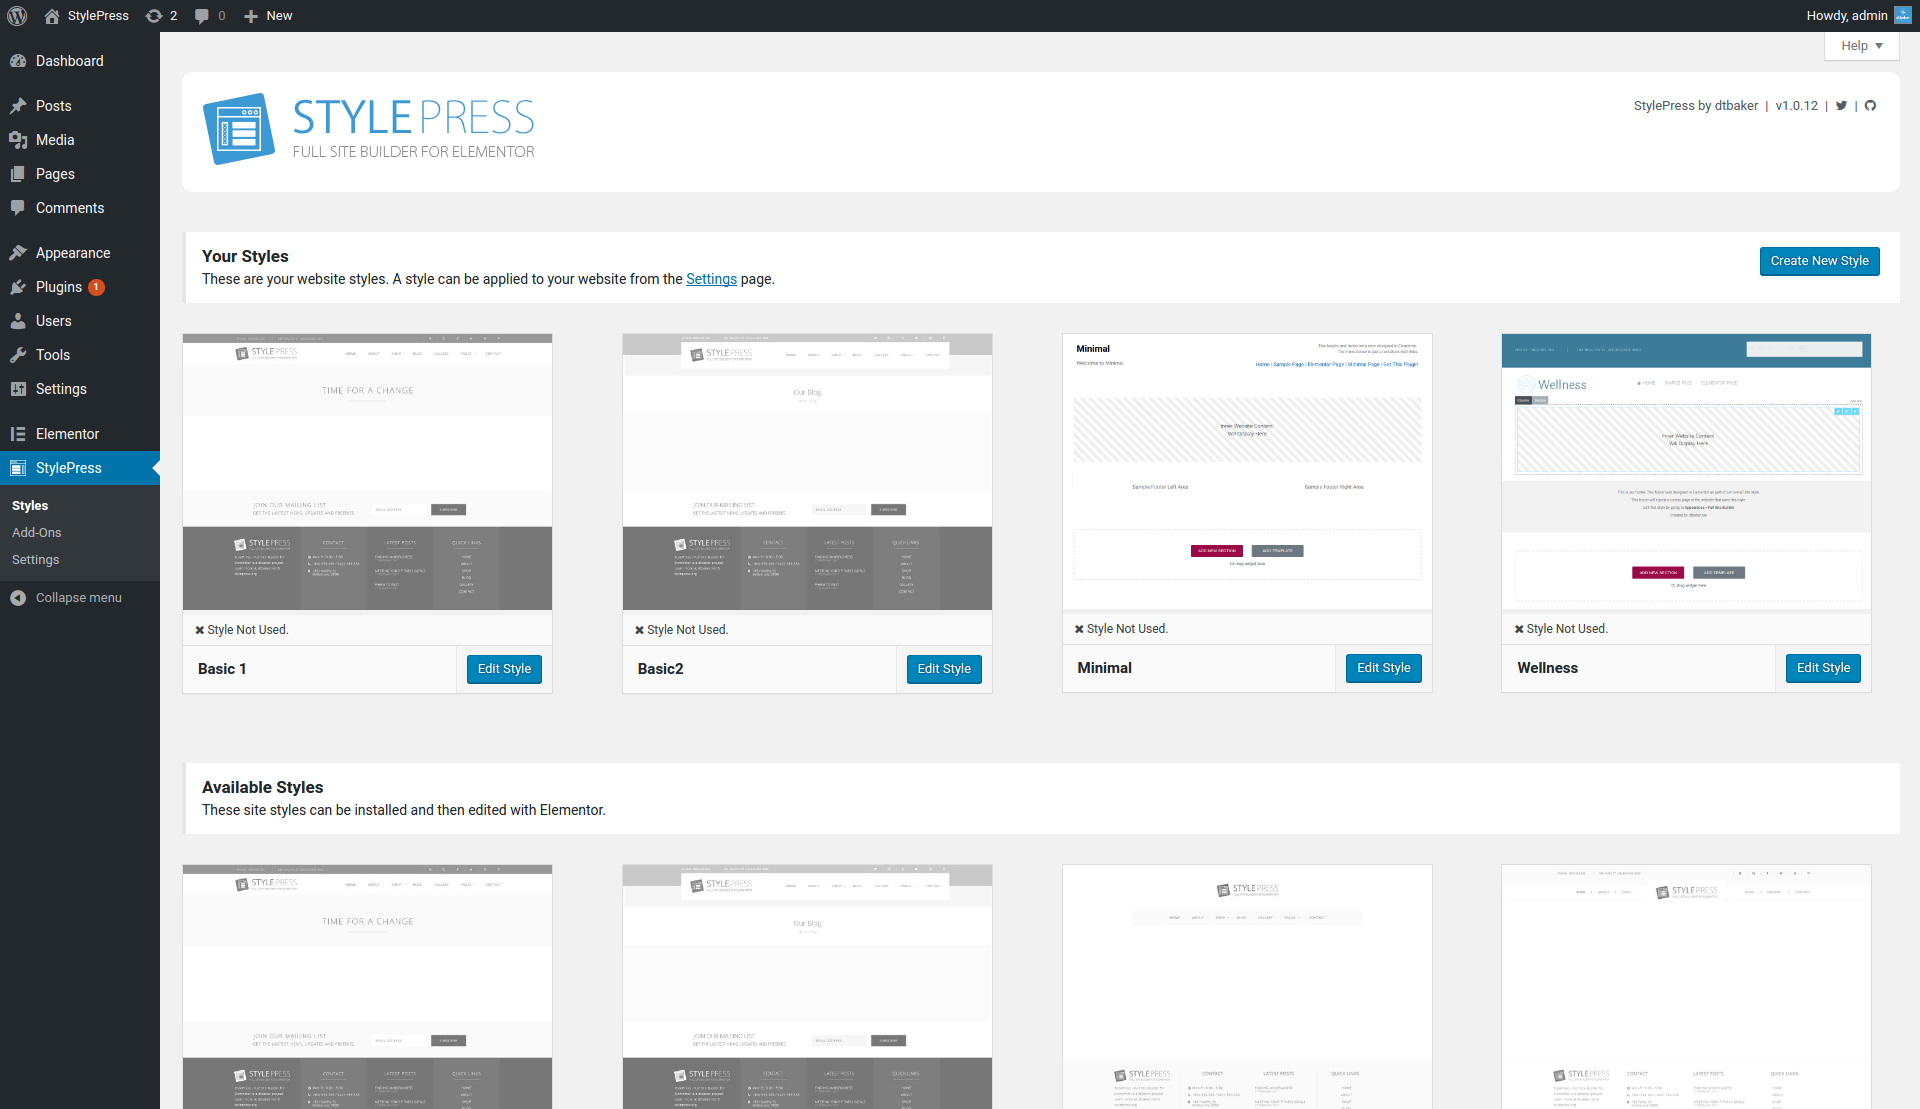 Overview of admin page. Showing all available styles for your site. Your site can have multiple styles.